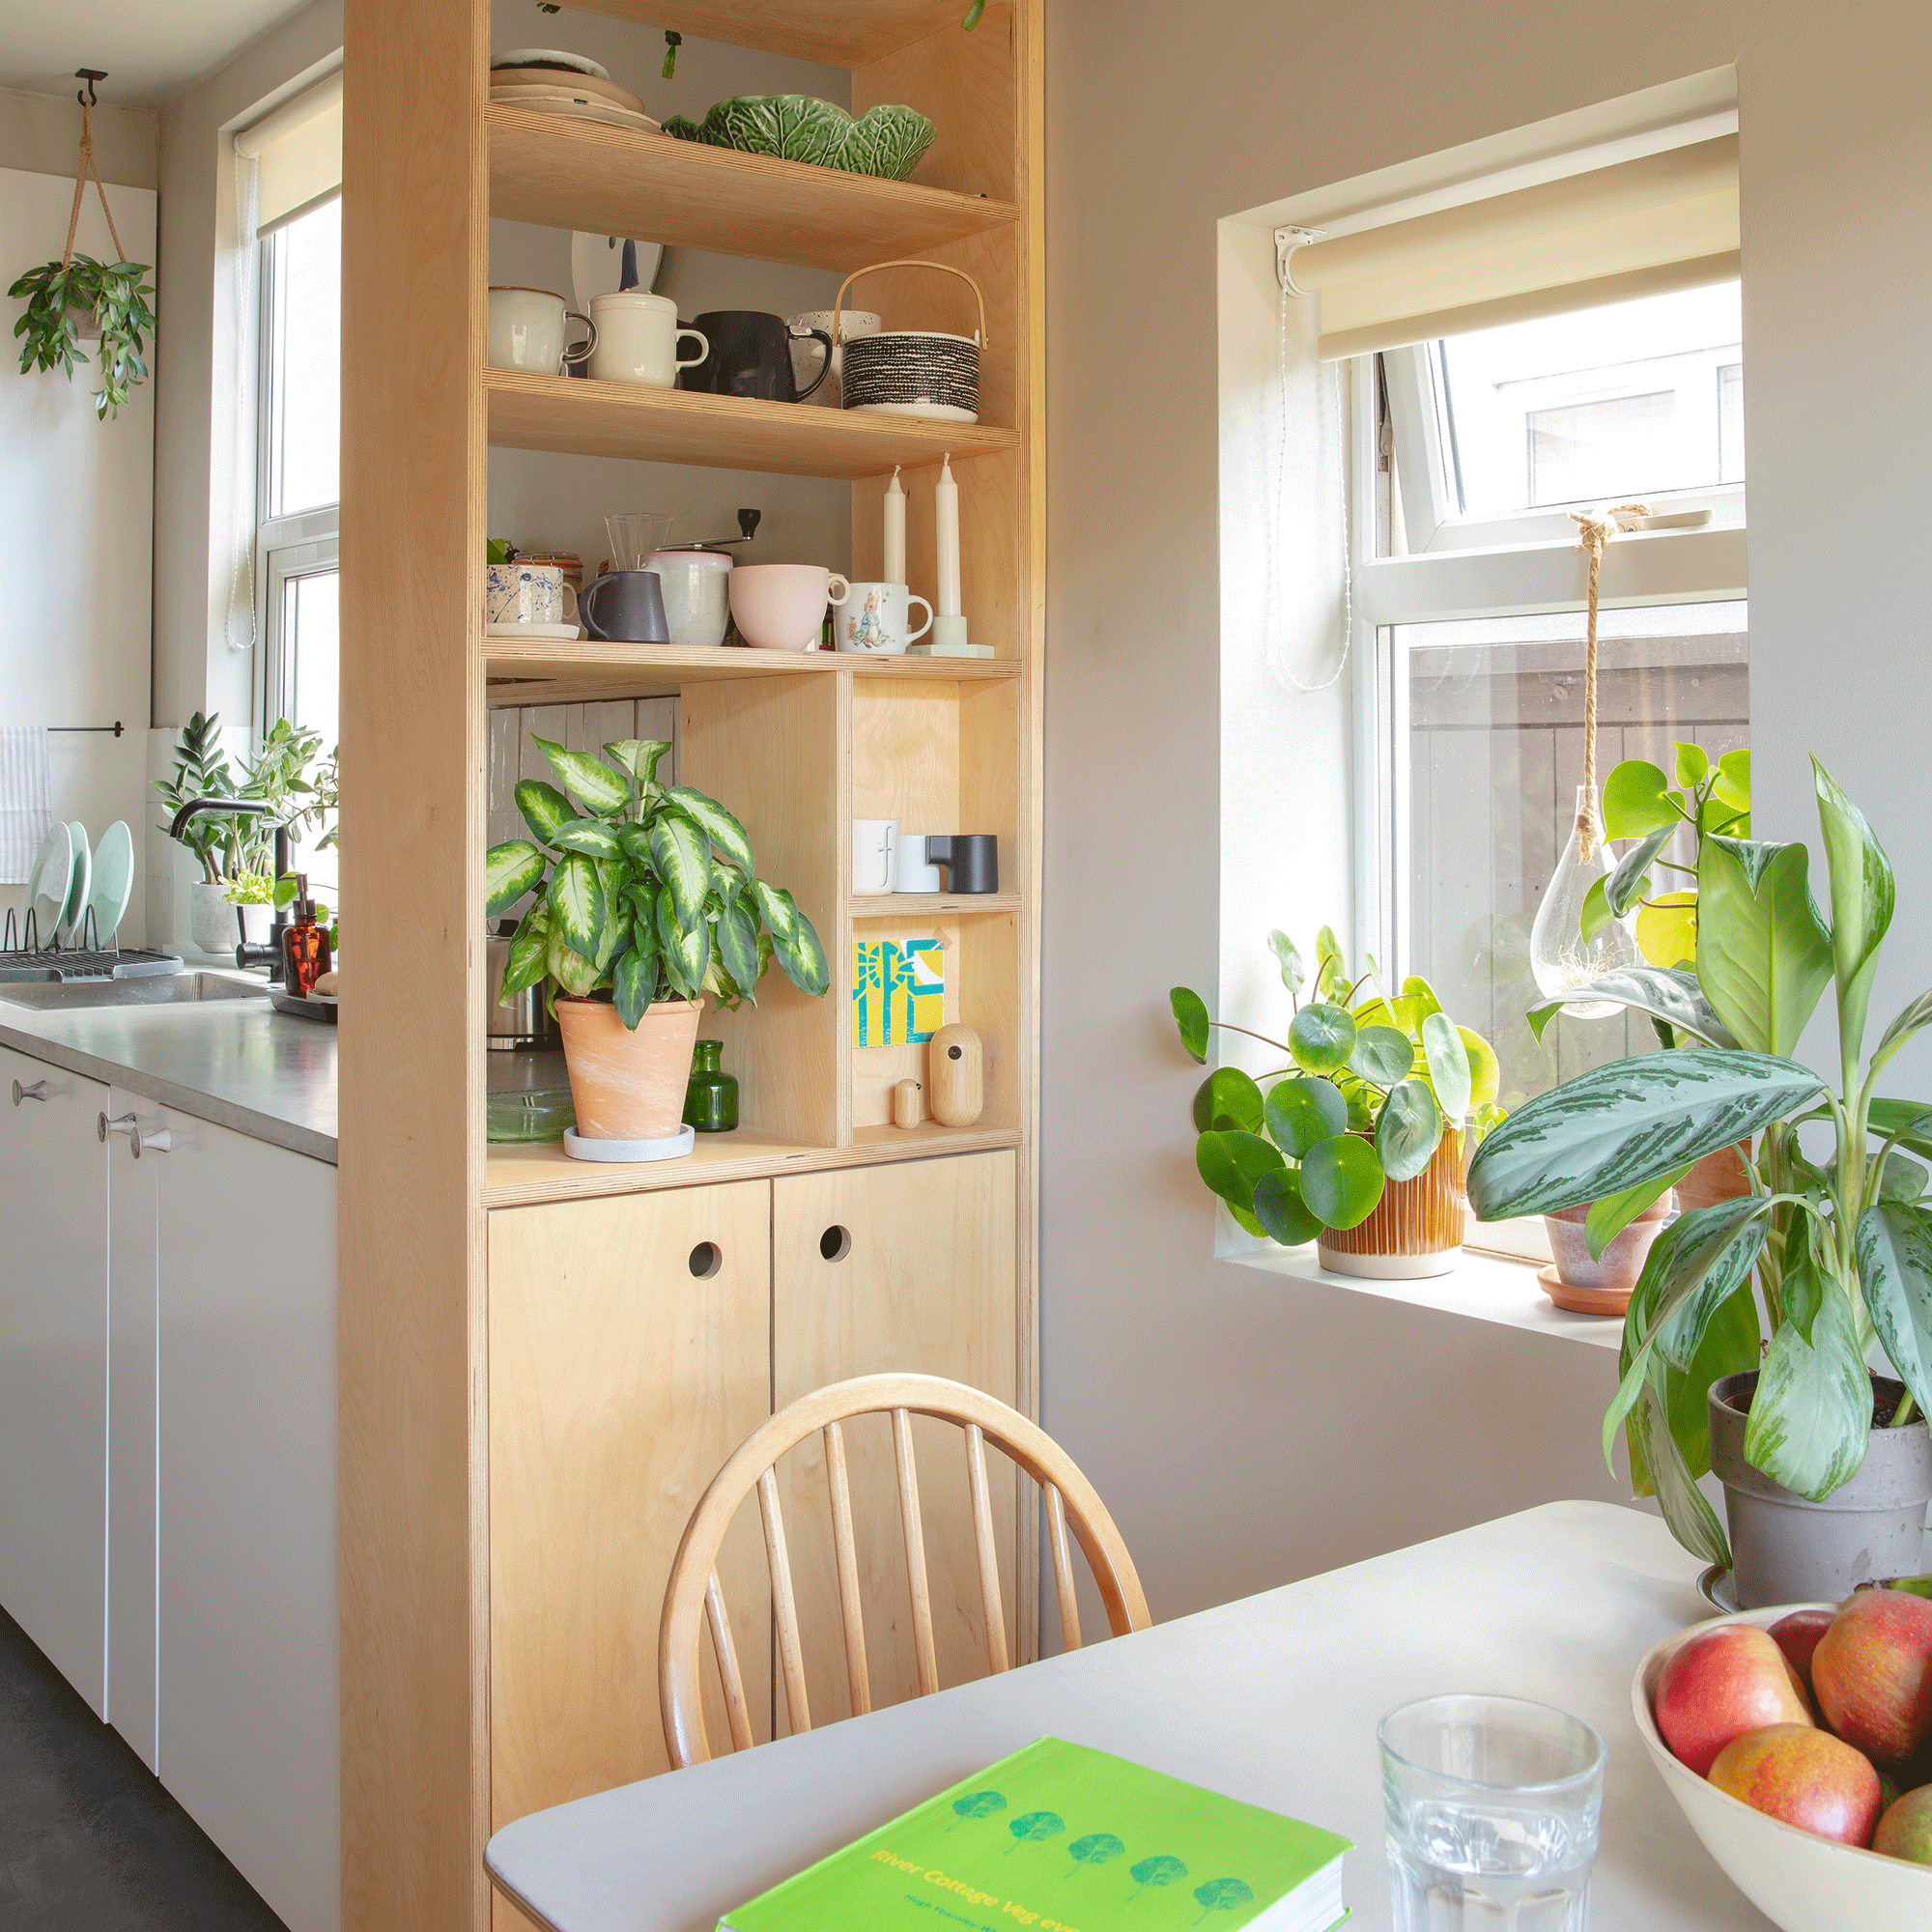 Wooden kitchen with houseplants on shelves and table